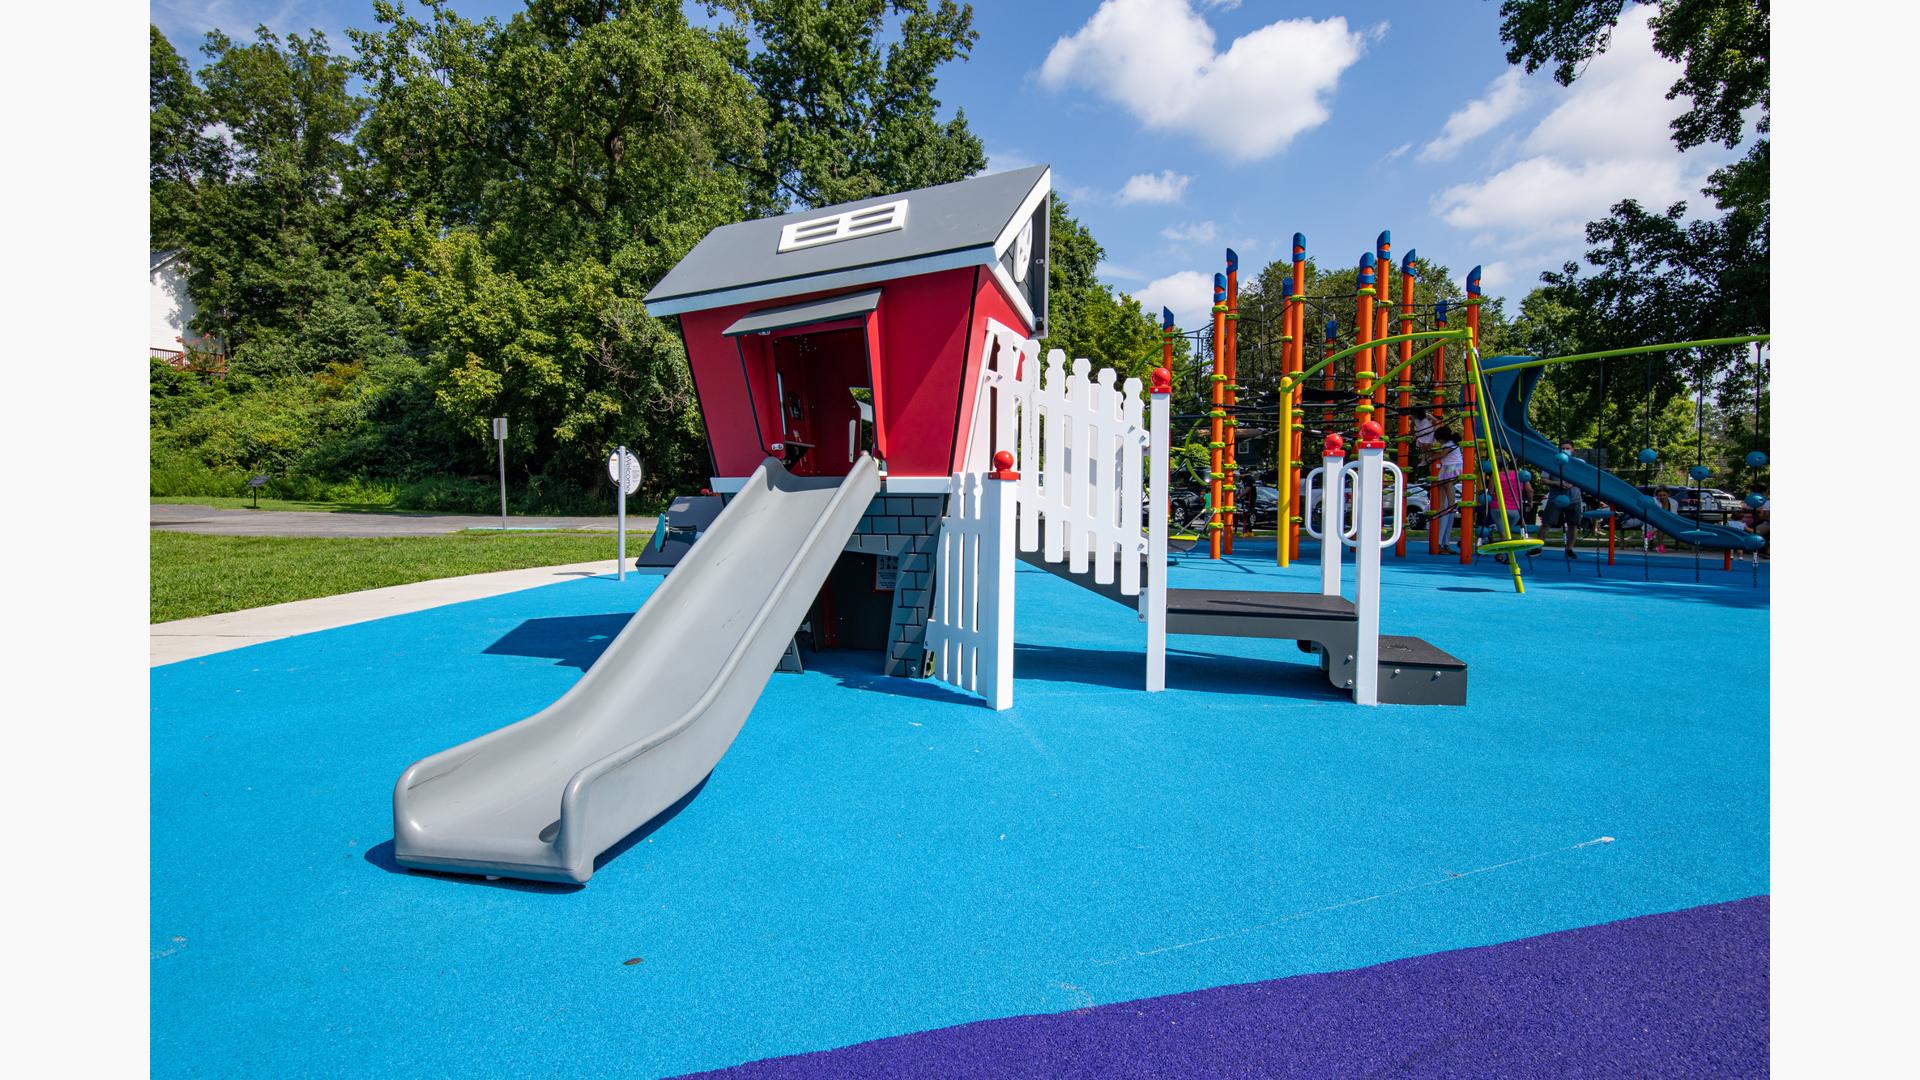 38th Avenue Neighborhood Park - Playground Design for All Ages!